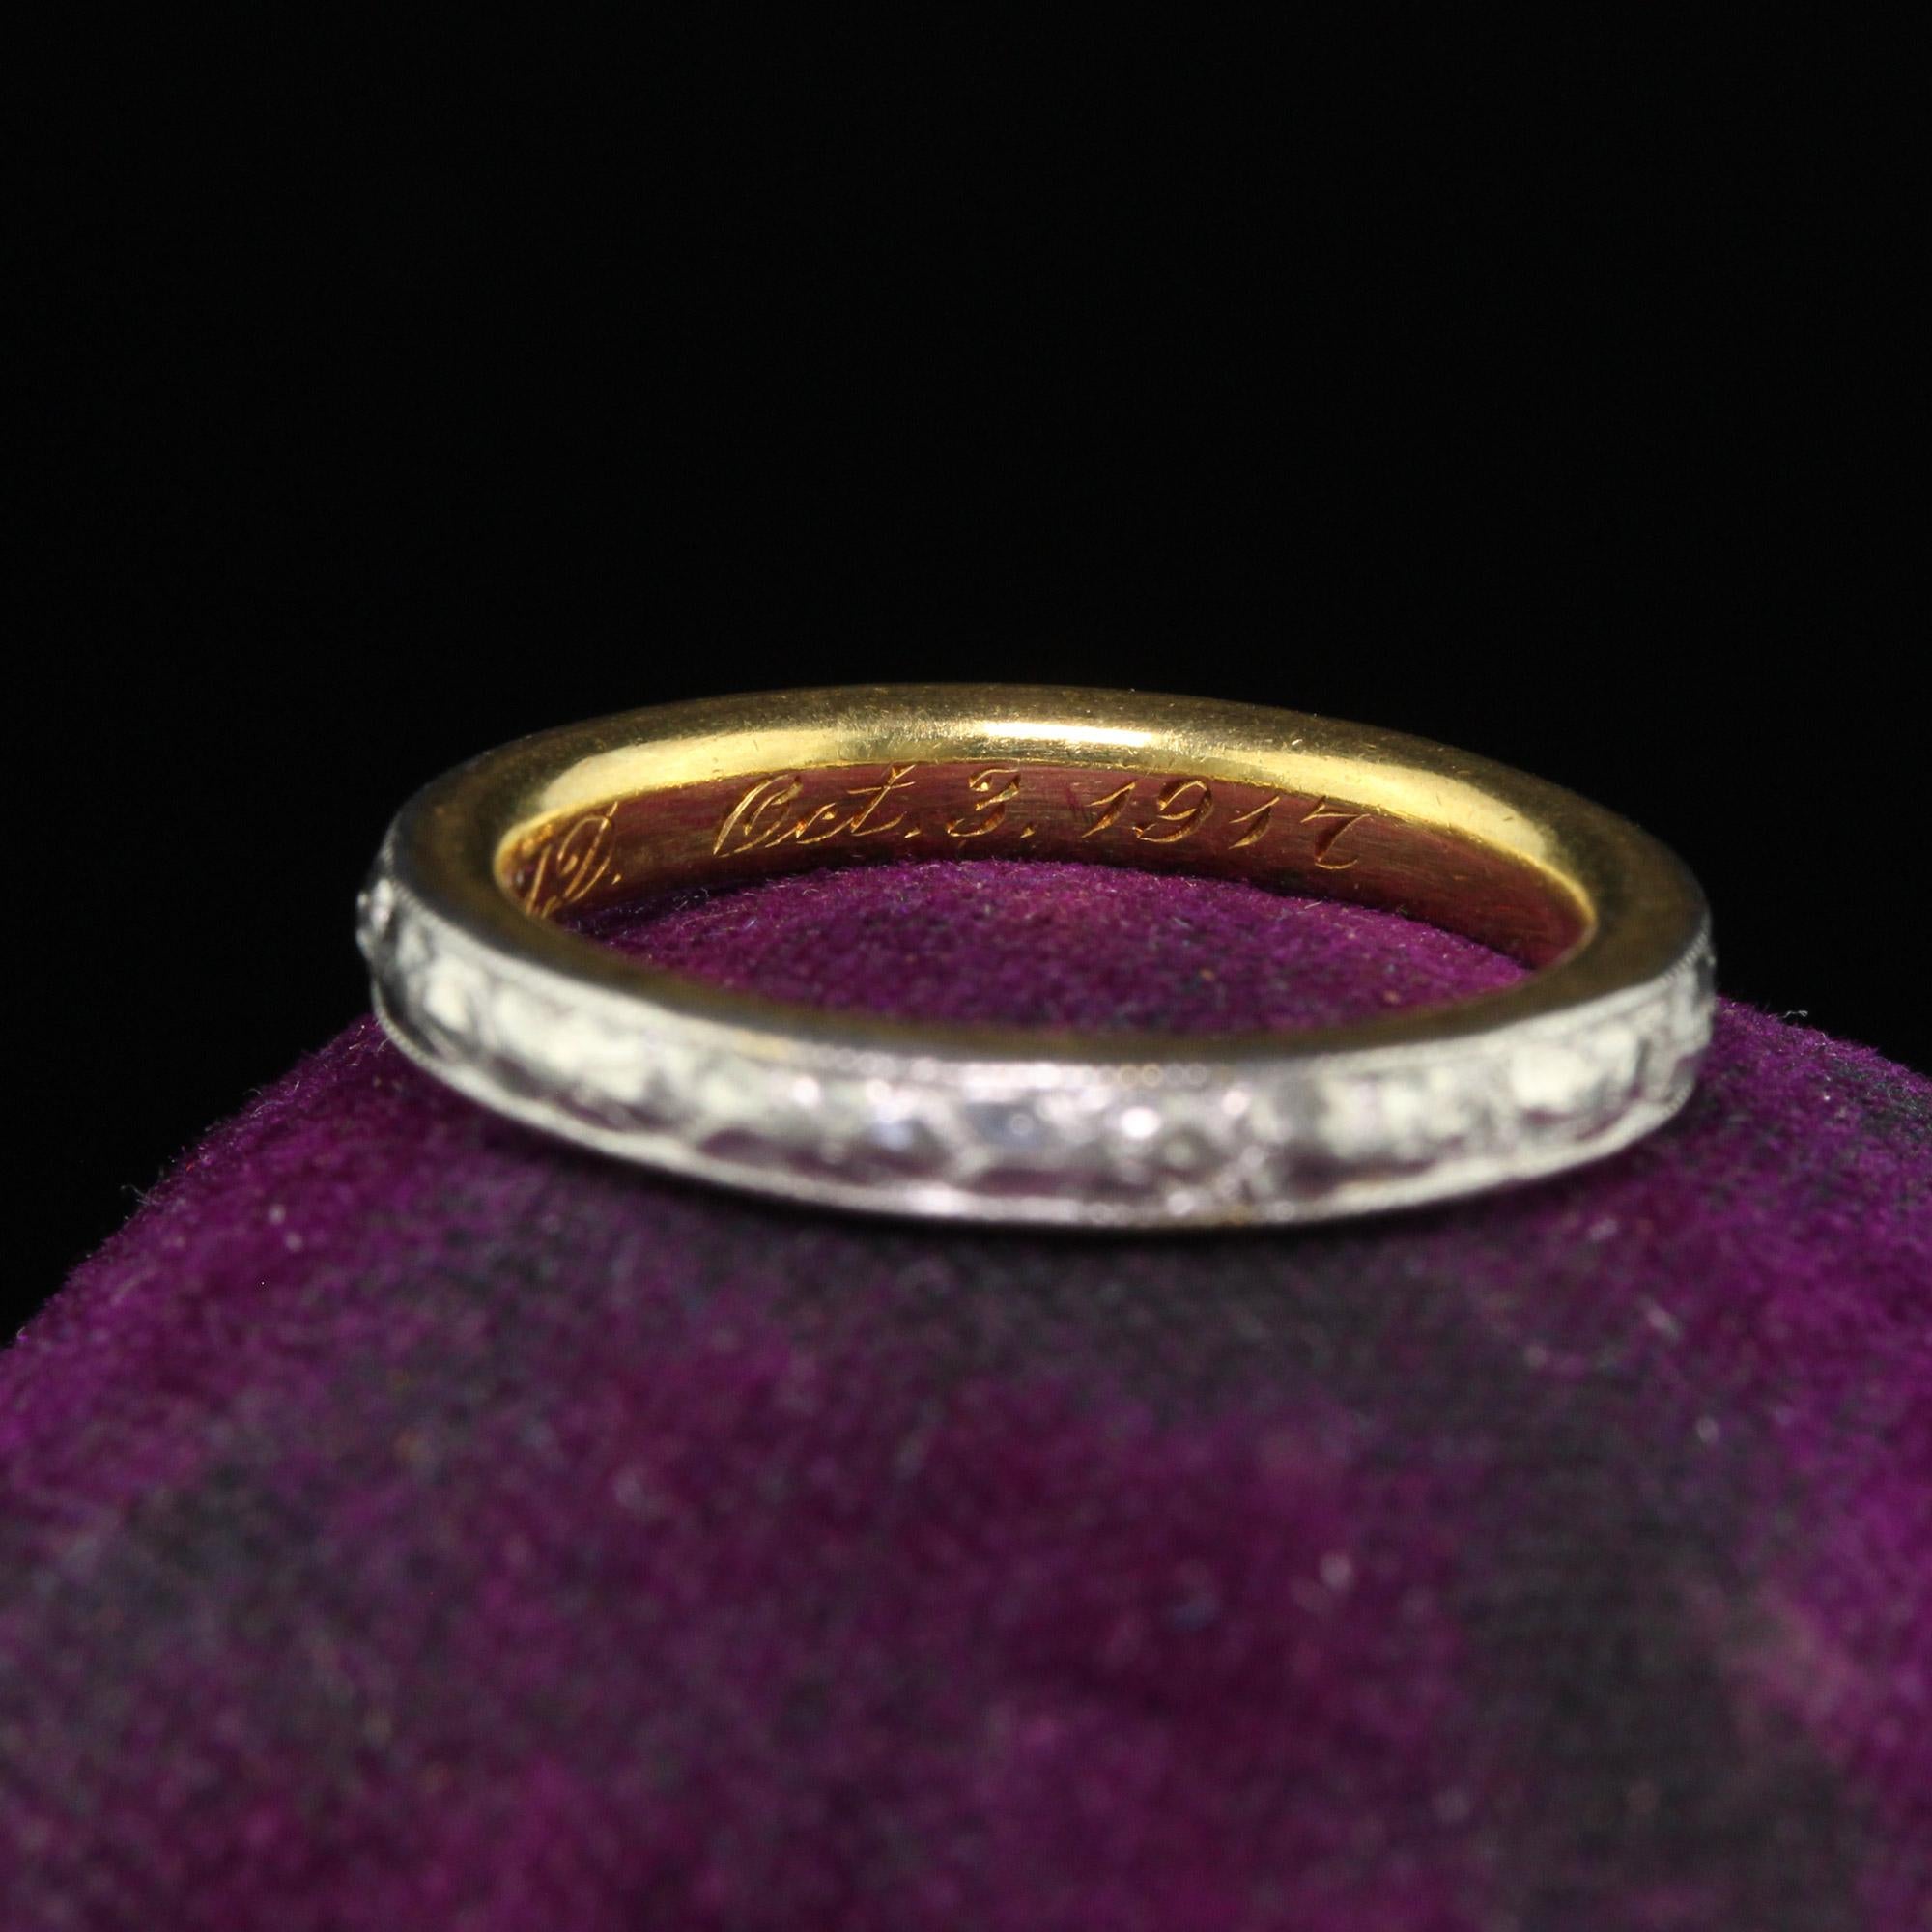 Antique Art Deco Platinum and 18K Gold Engraved Wedding Band Circa 1917 - Size 5 For Sale 1